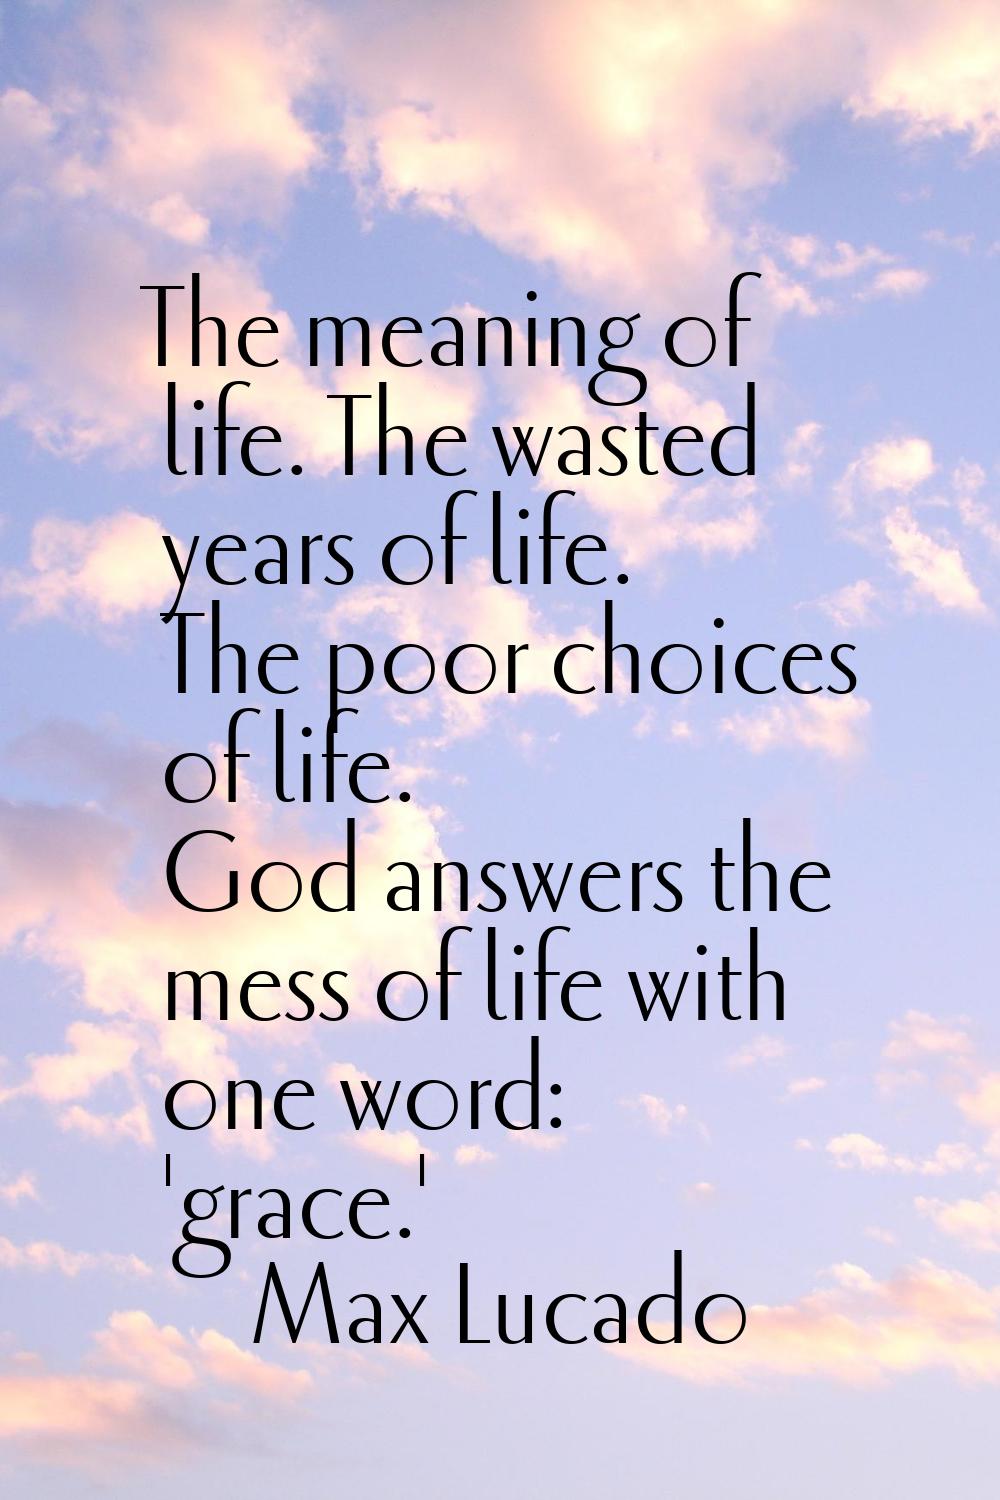 The meaning of life. The wasted years of life. The poor choices of life. God answers the mess of li